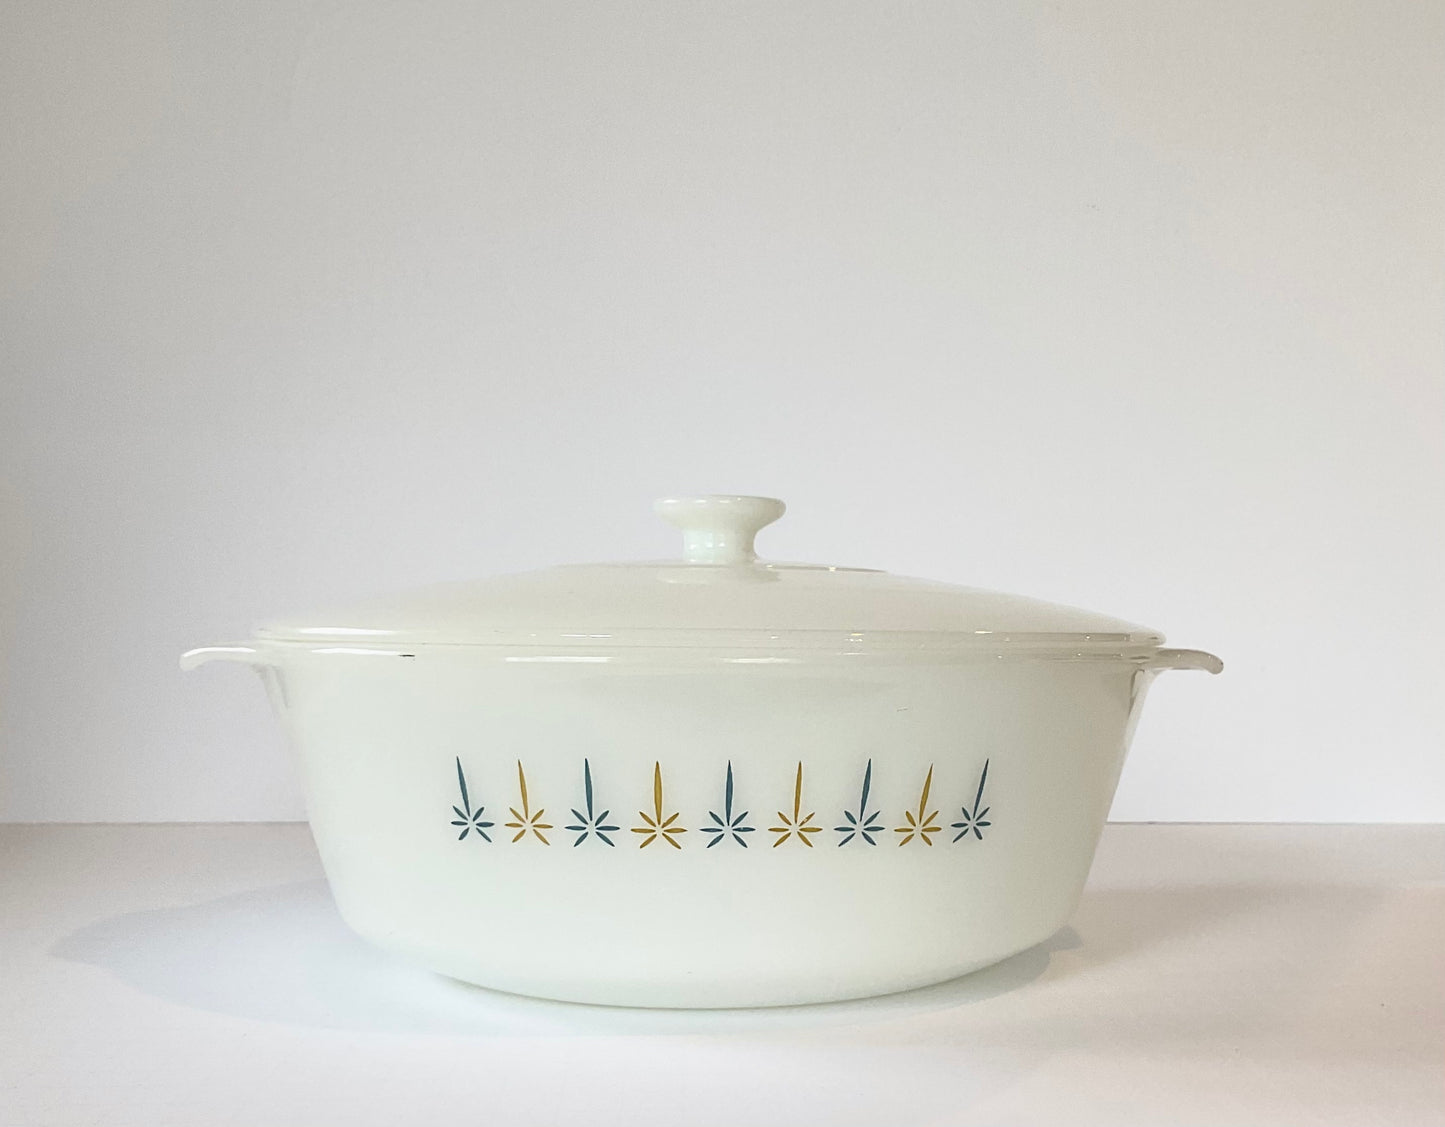 RARE Vintage Anchor Hocking Fire King 439 3 QT Casserole Dish Candleglow Starburst with Lid